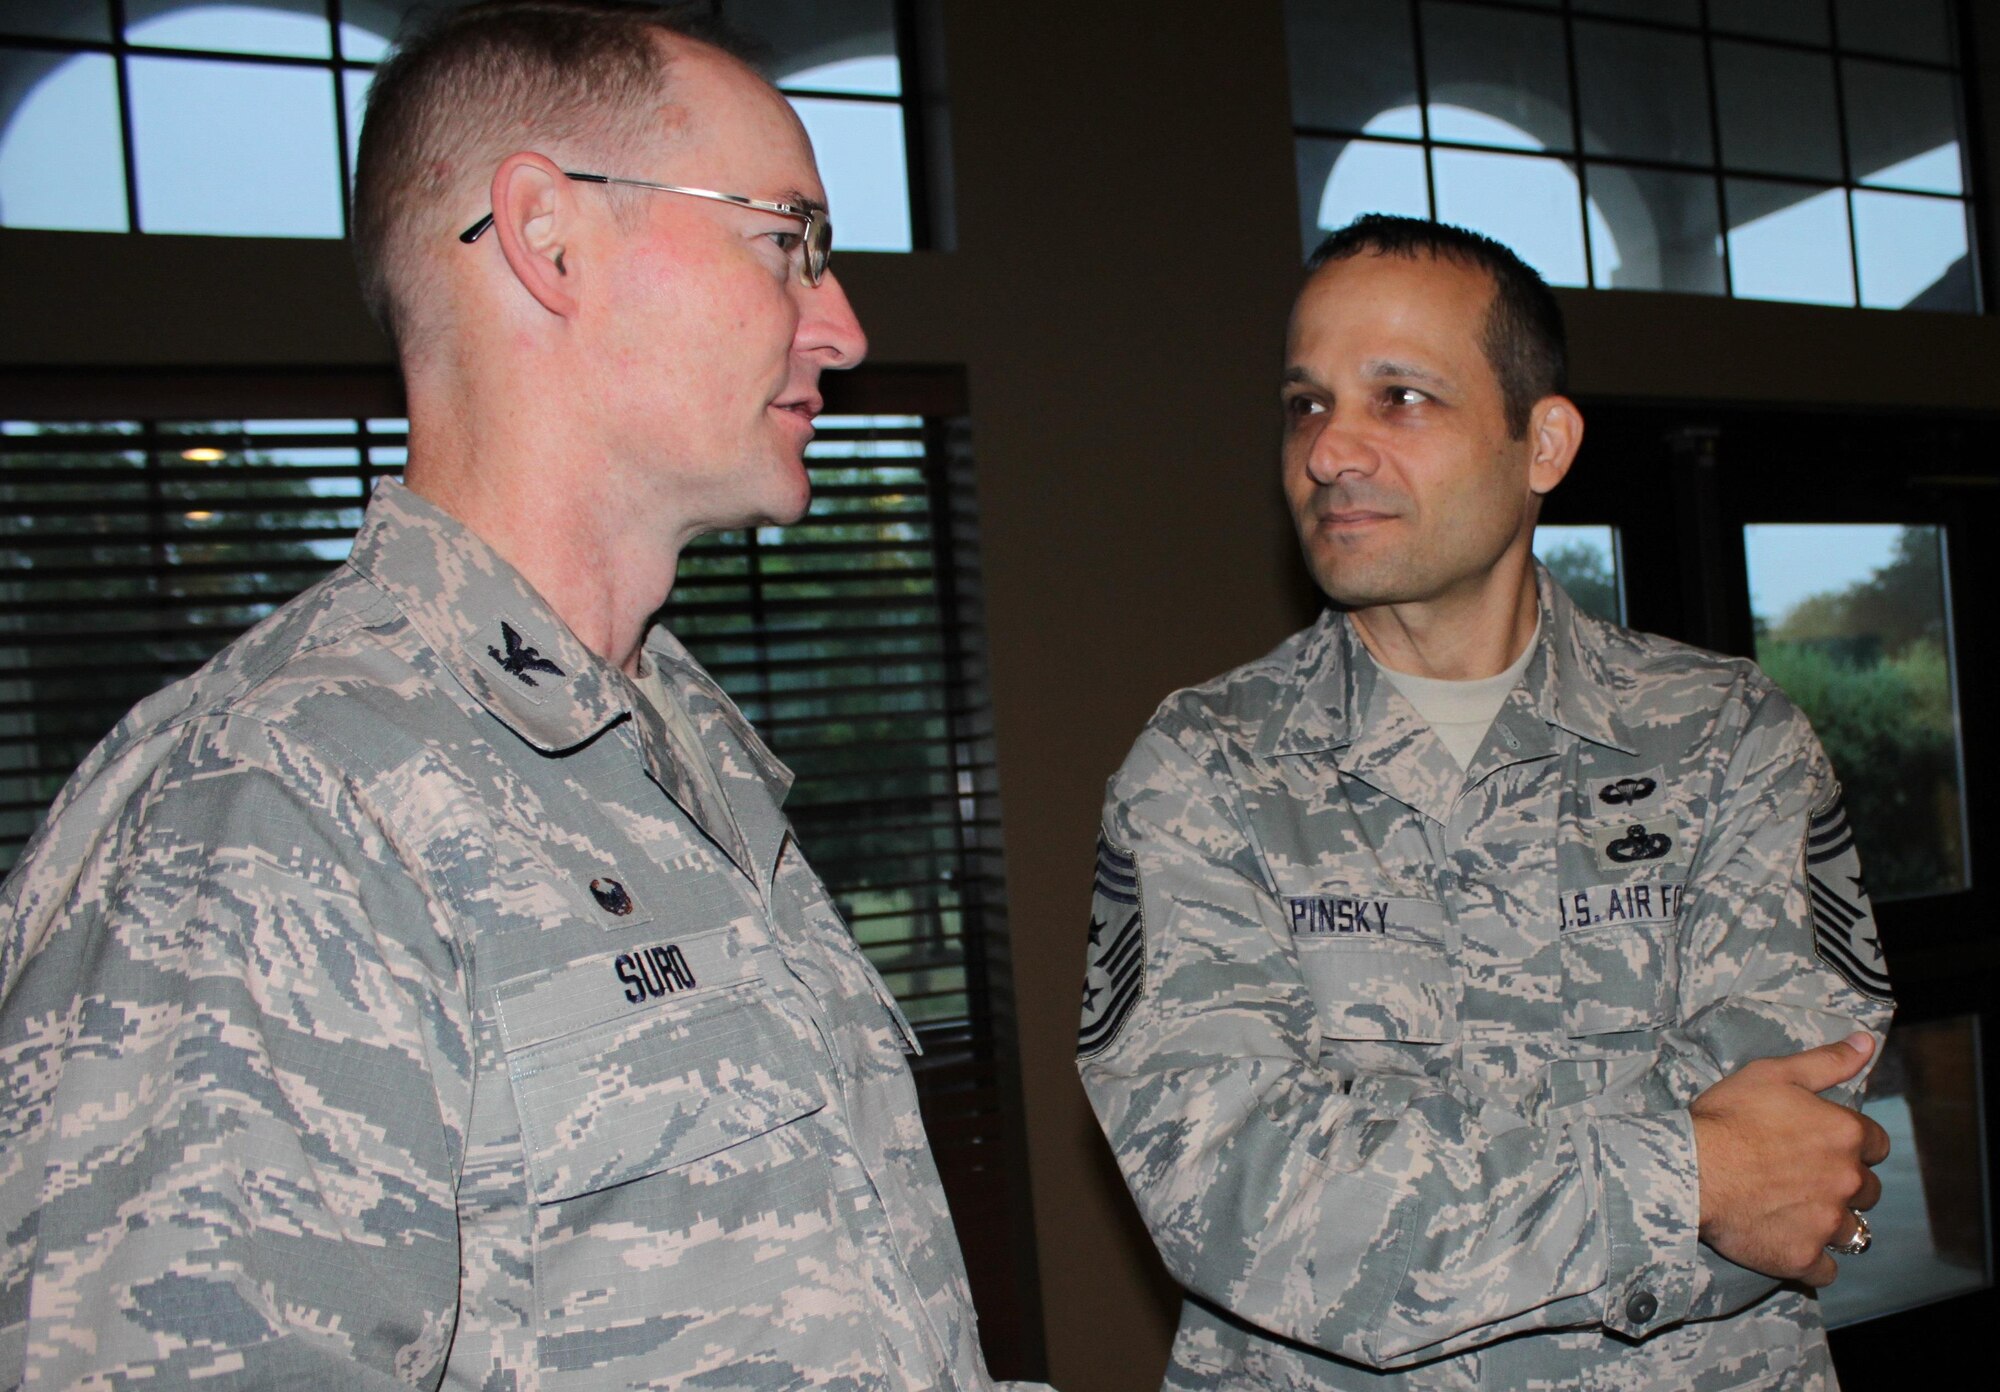 Col. Roger Suro, 340th Flying Training Group, chats with Chief Master Sgt. Brian Pinsky,